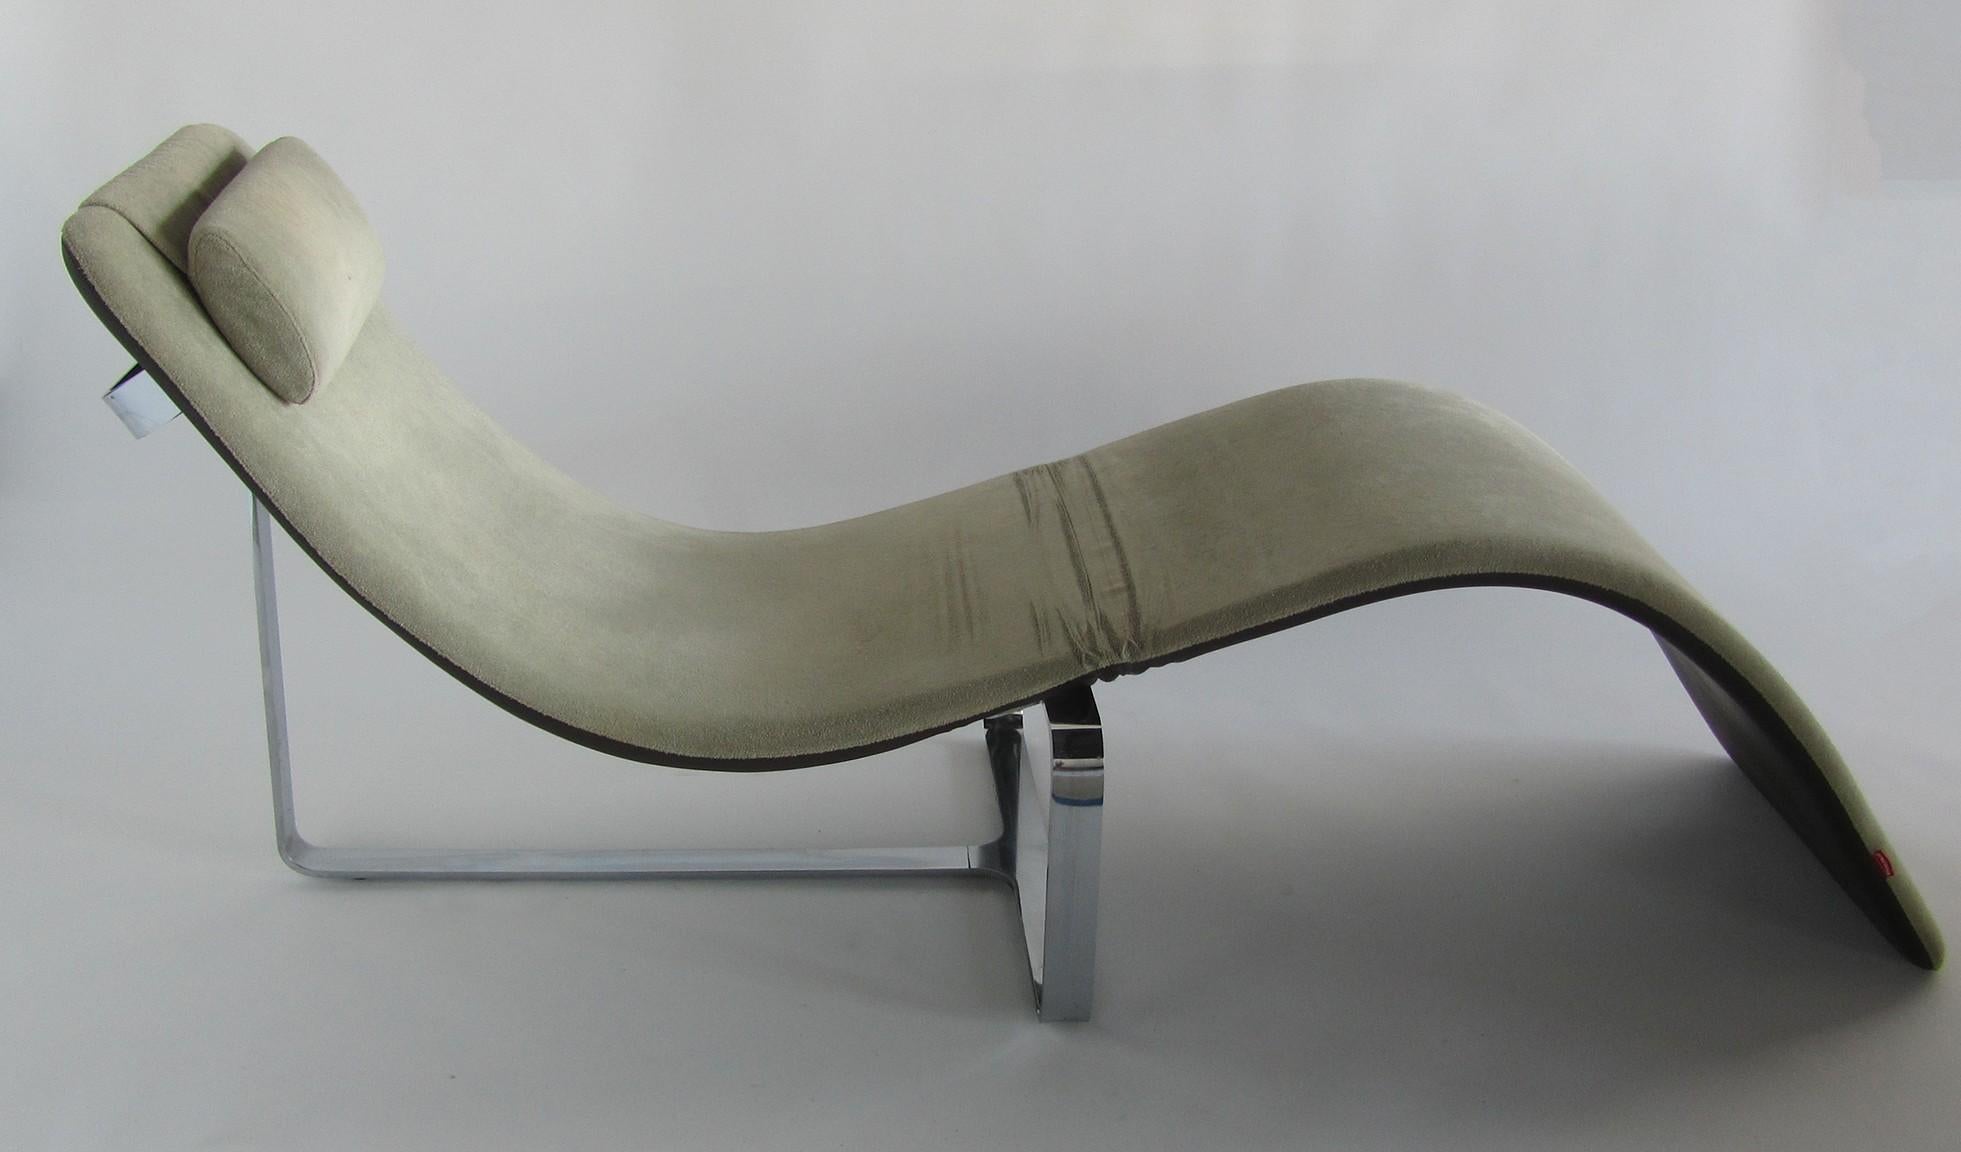 This is a unique piece. Closed it is chic lounge chair in supple leather, then it is a metamorphic chaise lounge with the fabric being a soft chenille. Produced by Baleri Italia and designed by Jeff Miller.